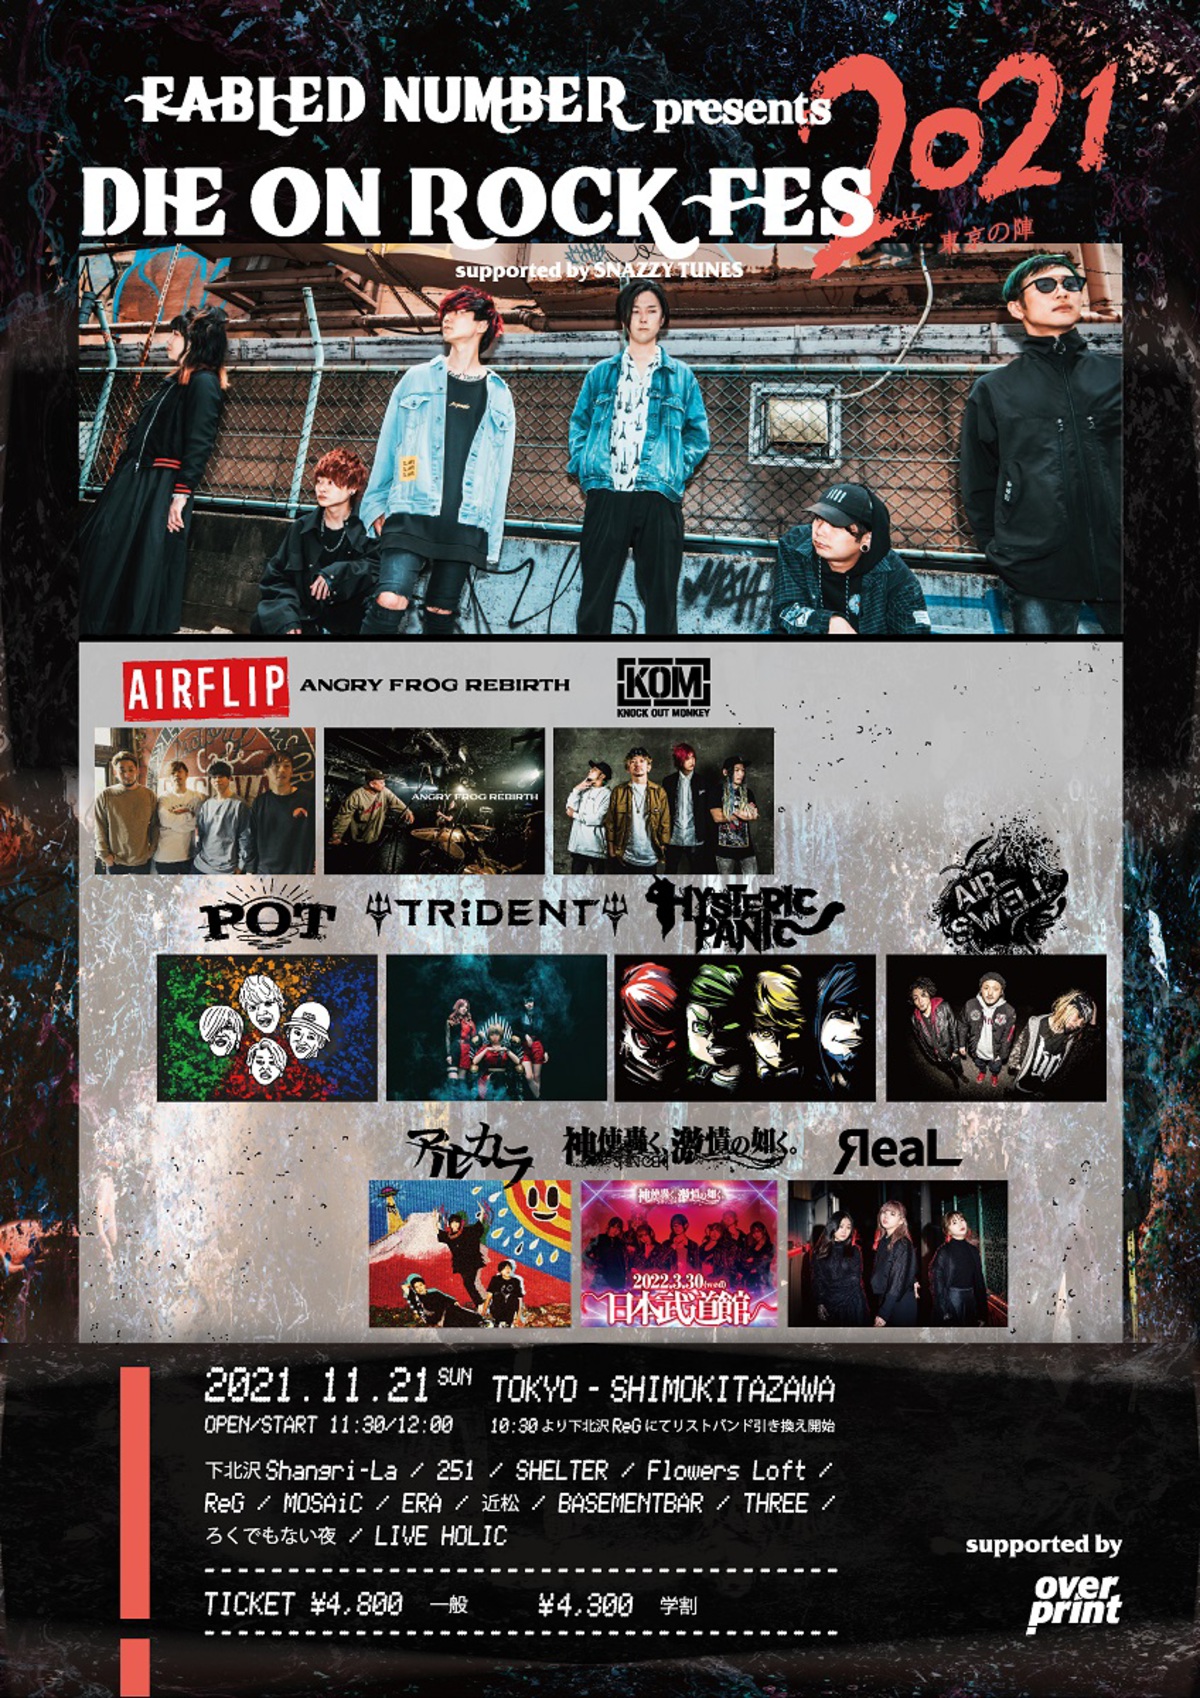 Fabled Number主催サーキット イベント Die On Rock Fes 第1弾出演者発表 アルカラ Airflip Knock Out Monkey Yaealら10組決定